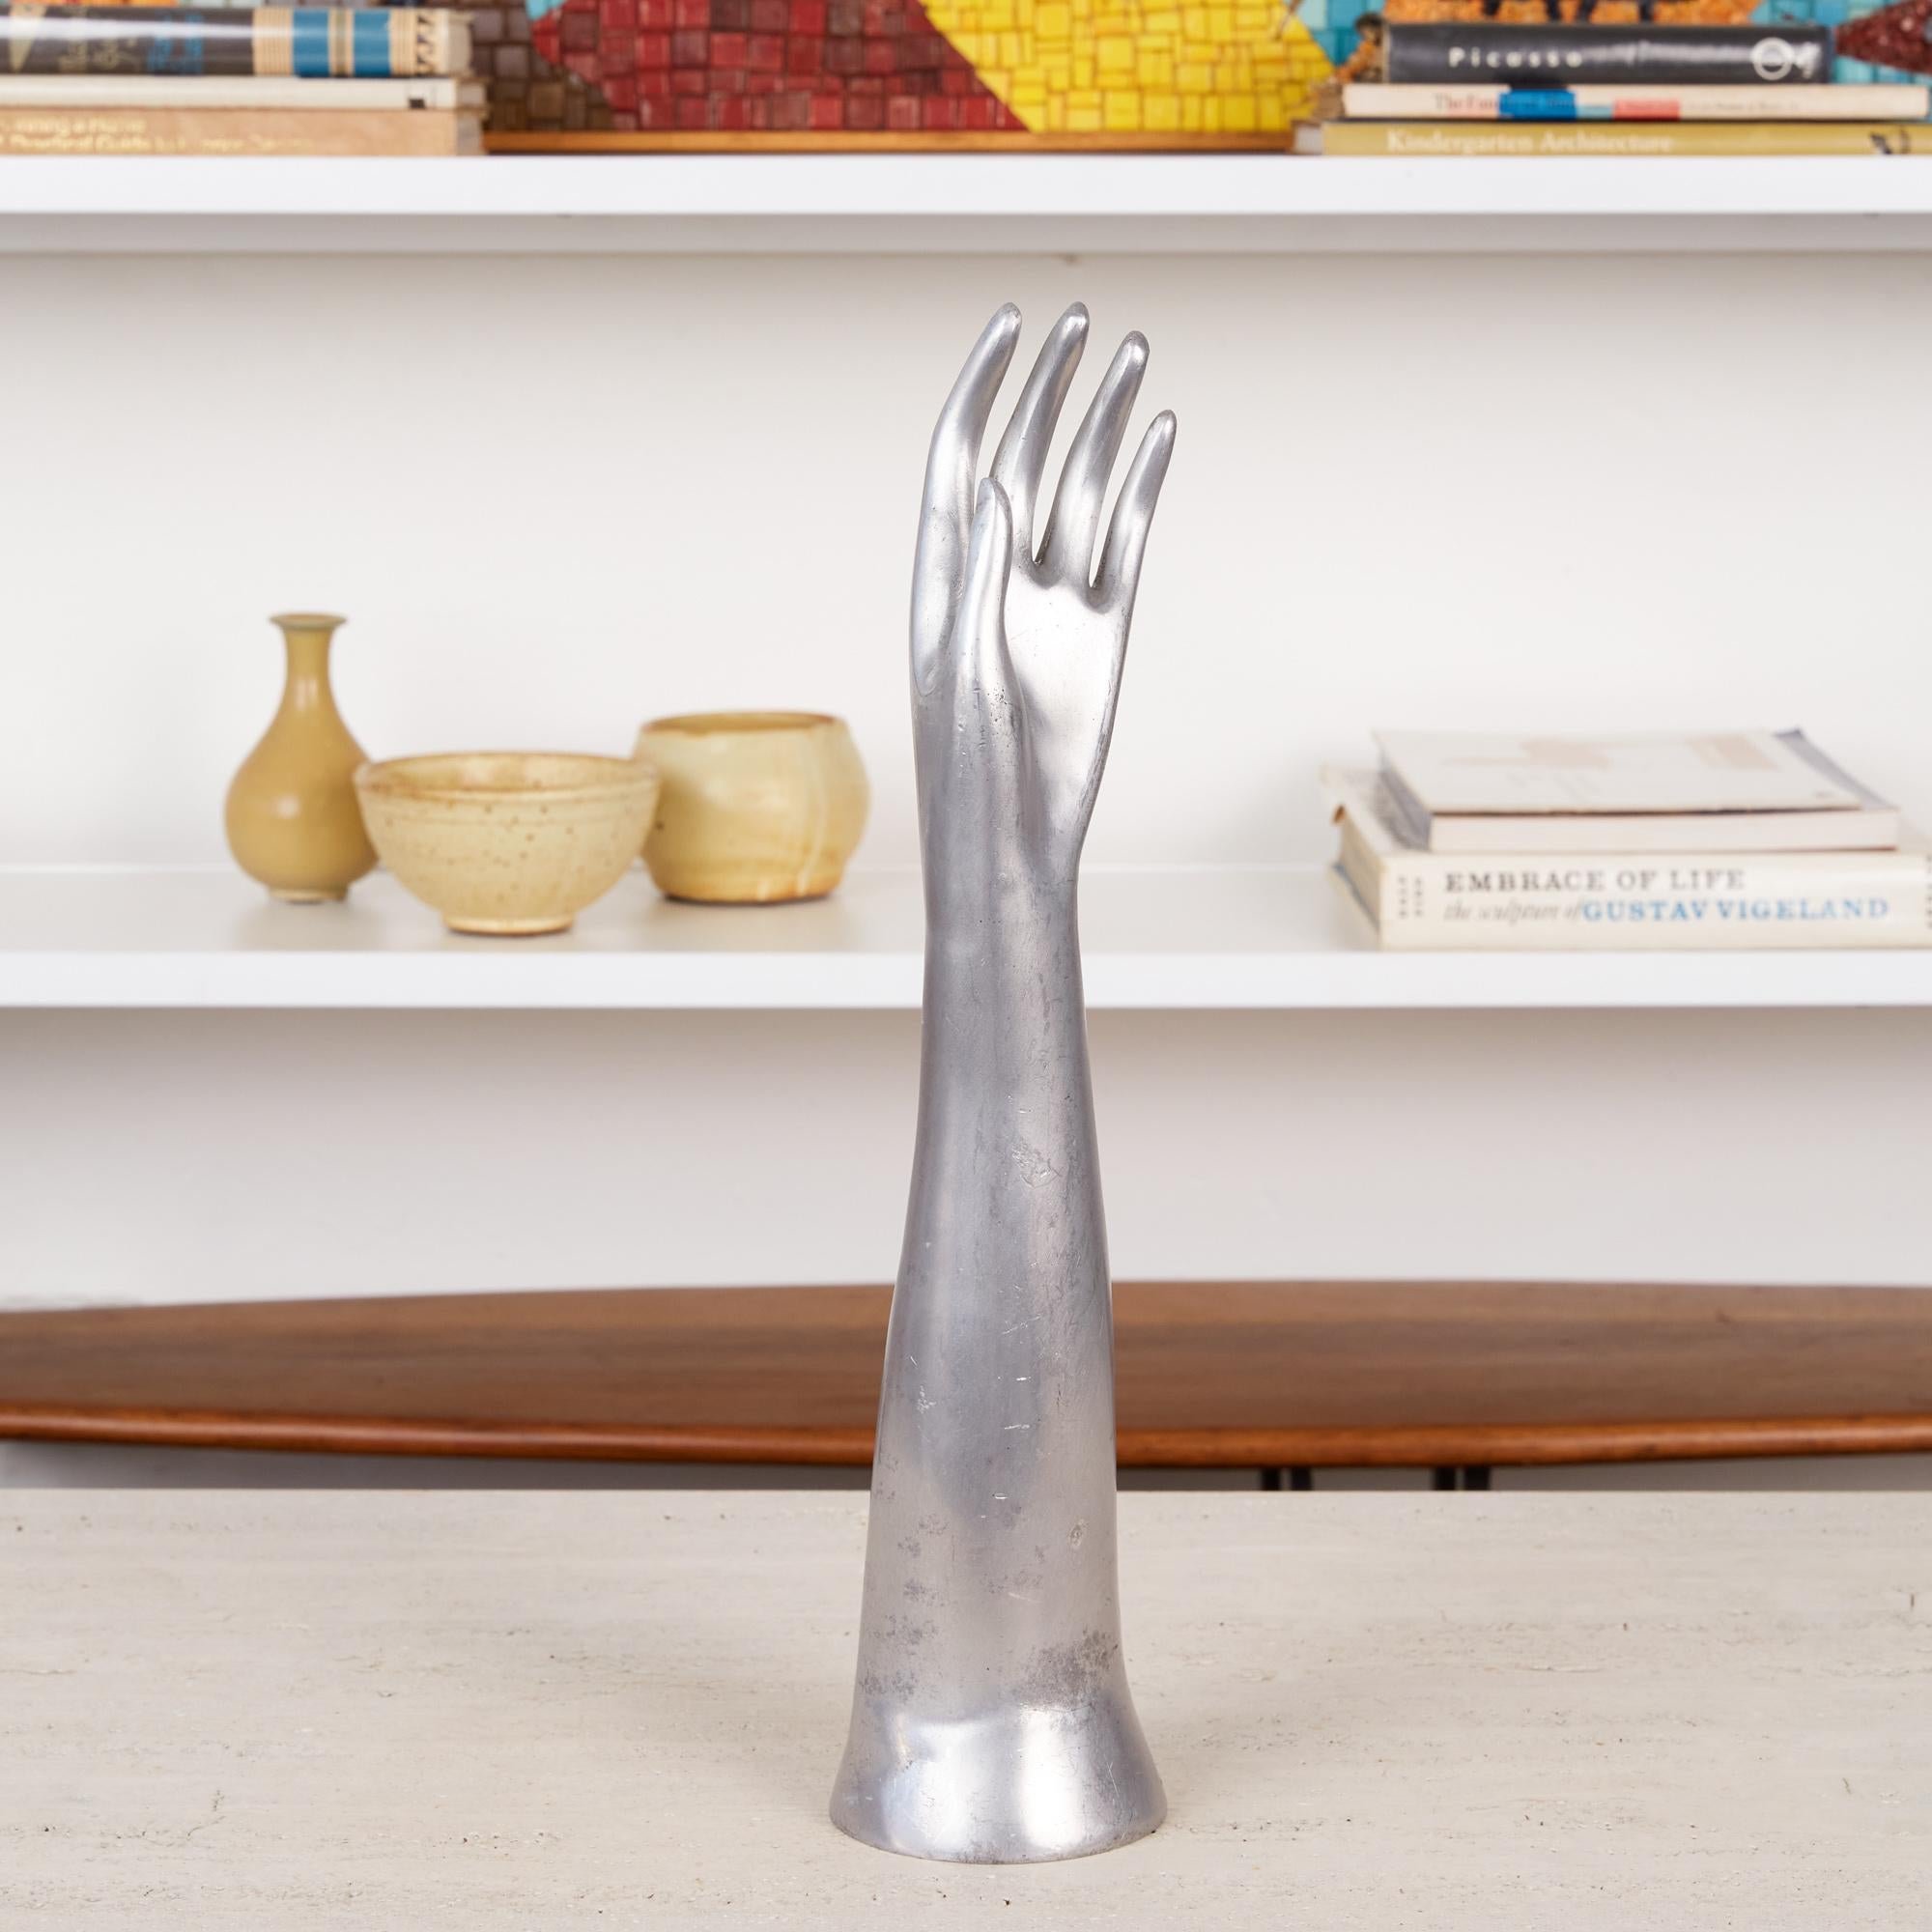 Heavy in weight, but graceful in form, this cast aluminum left forearm features a delicate hand at its crest. Its feminine, graceful fingers carry a sense of longing, reaching out for the ethereal. Can be used as bookcase or table decor or to